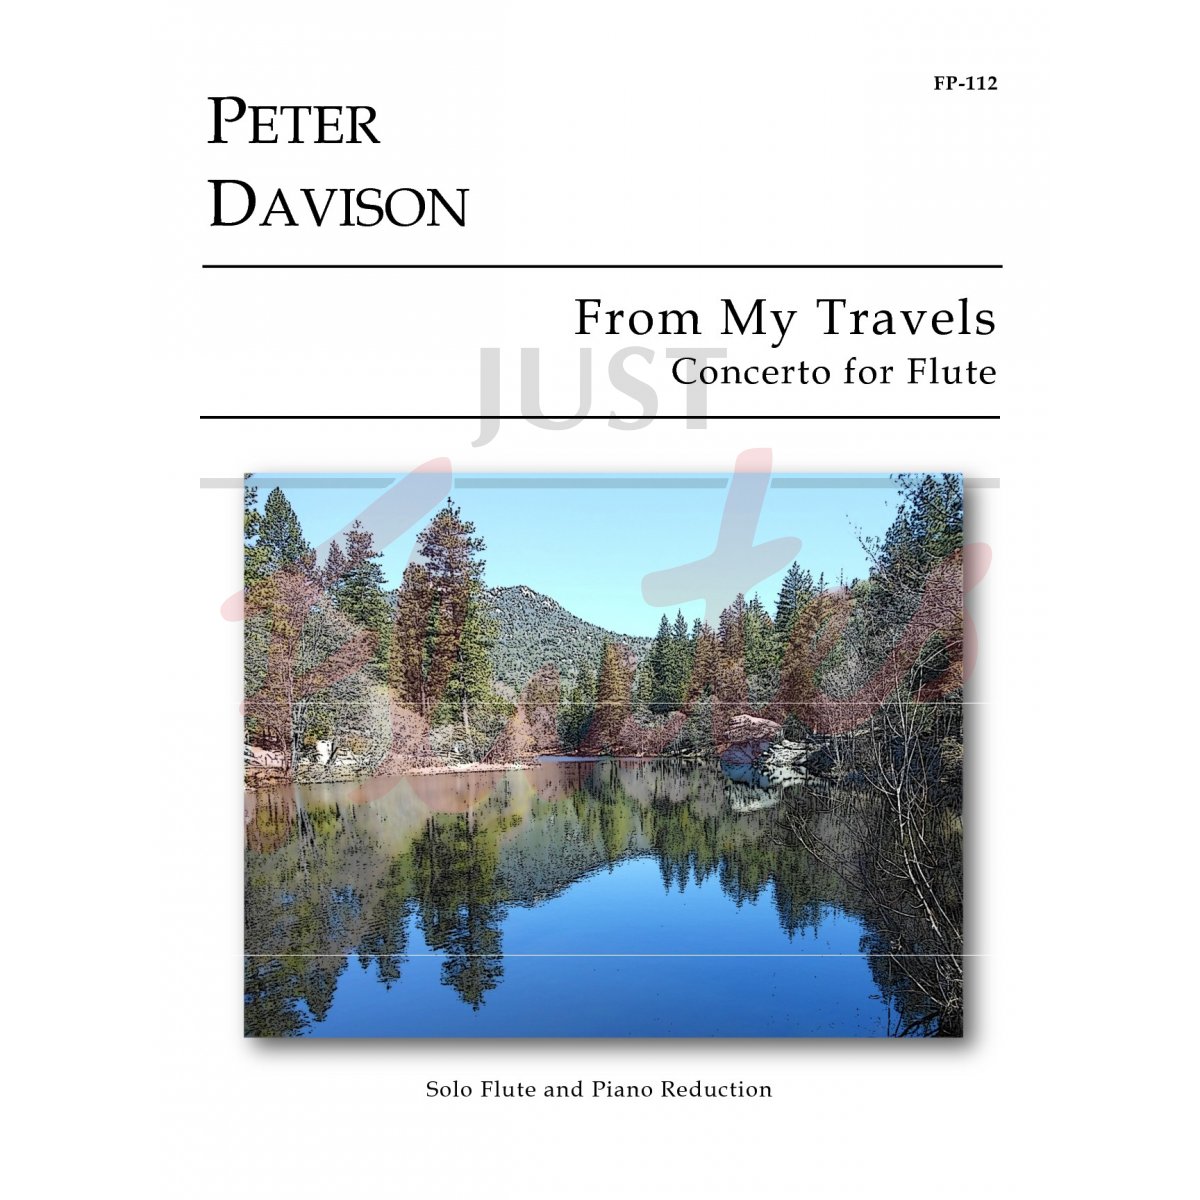 From My Travels - Concerto for Flute (Piano Reduction)